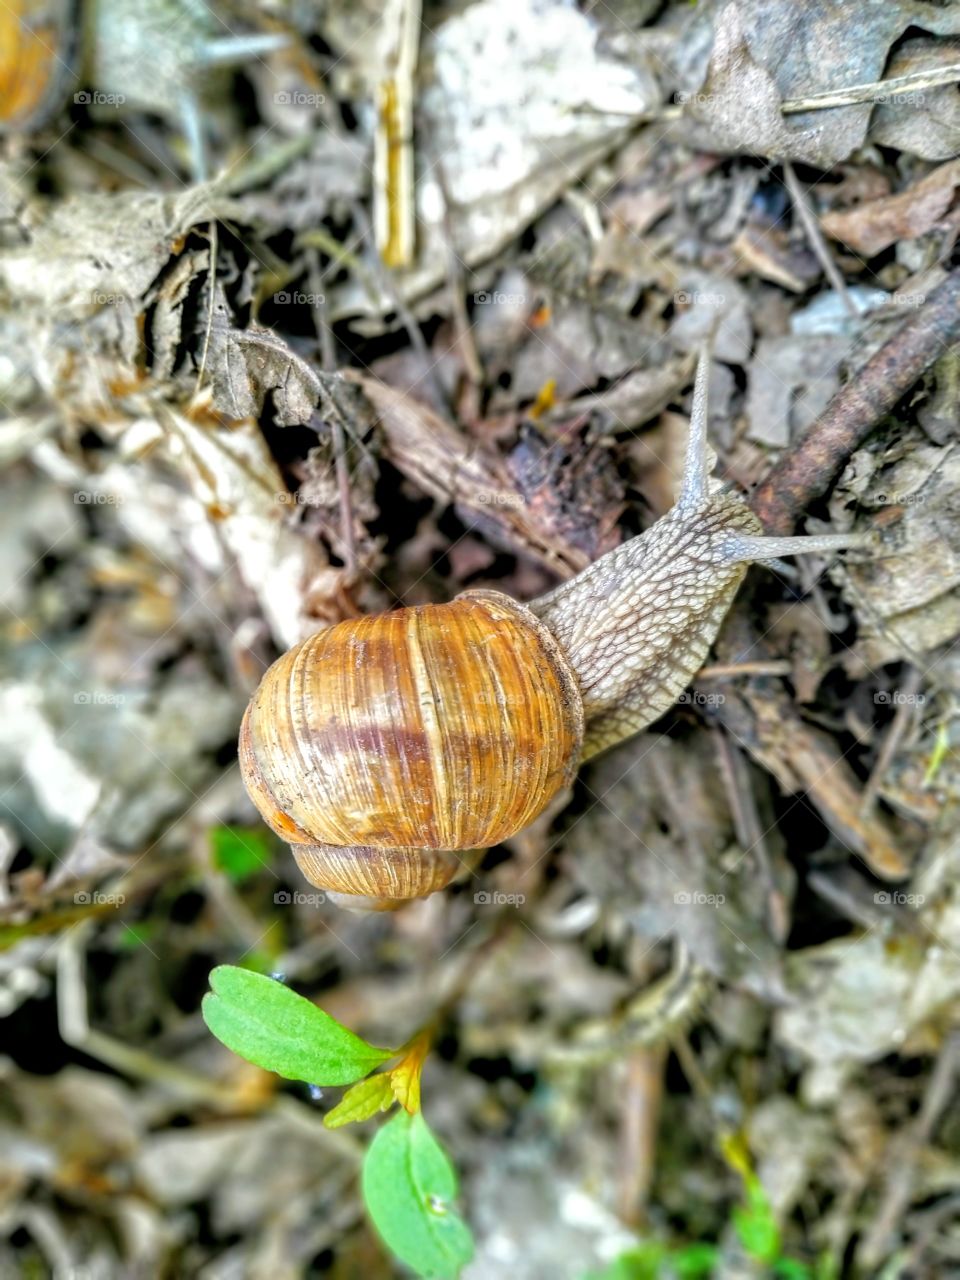 snail in the foliage